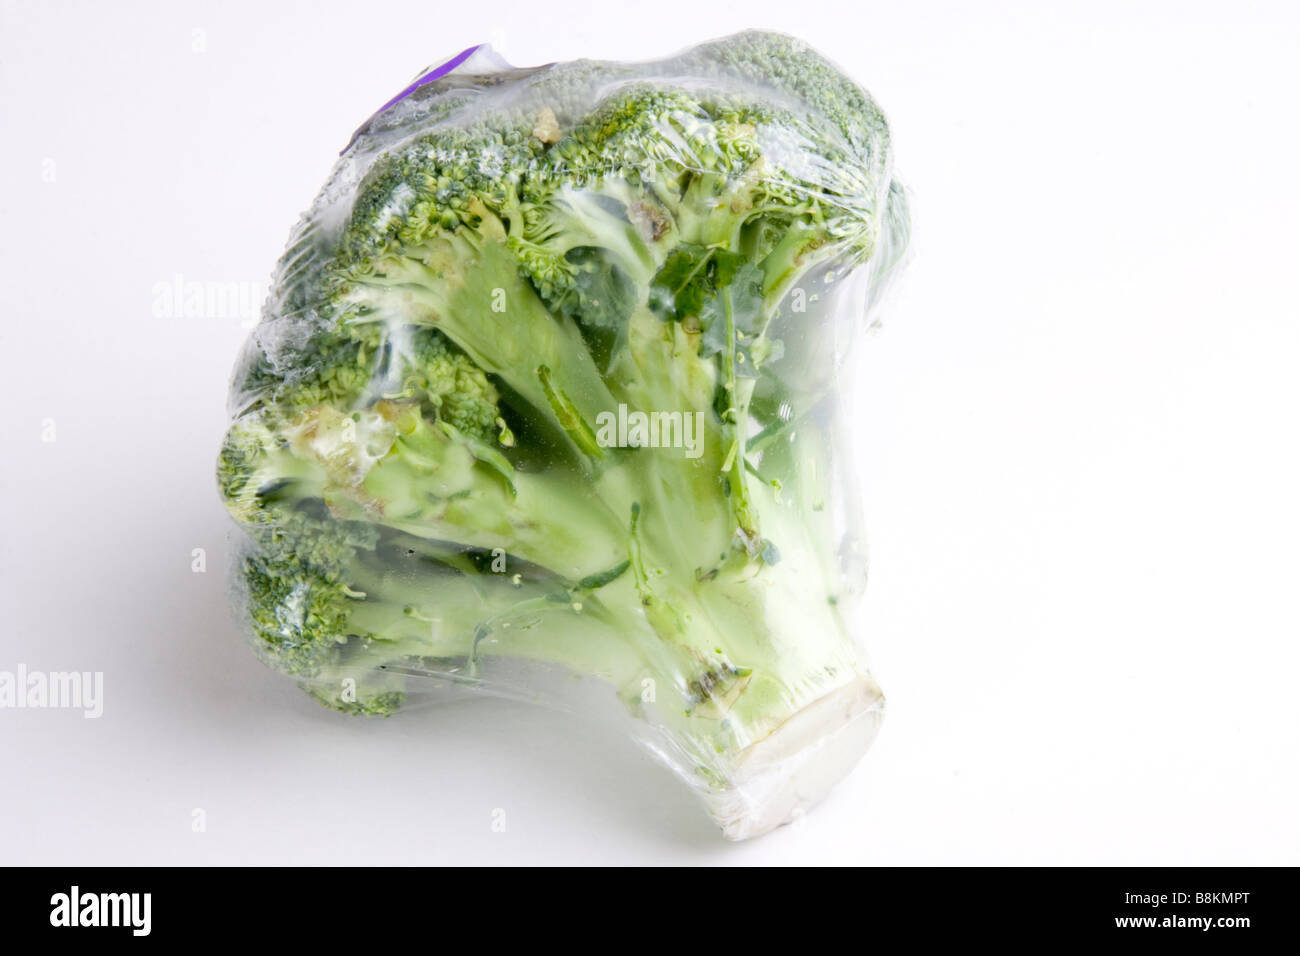 Broccoli sealed in plastic packaging Stock Photo